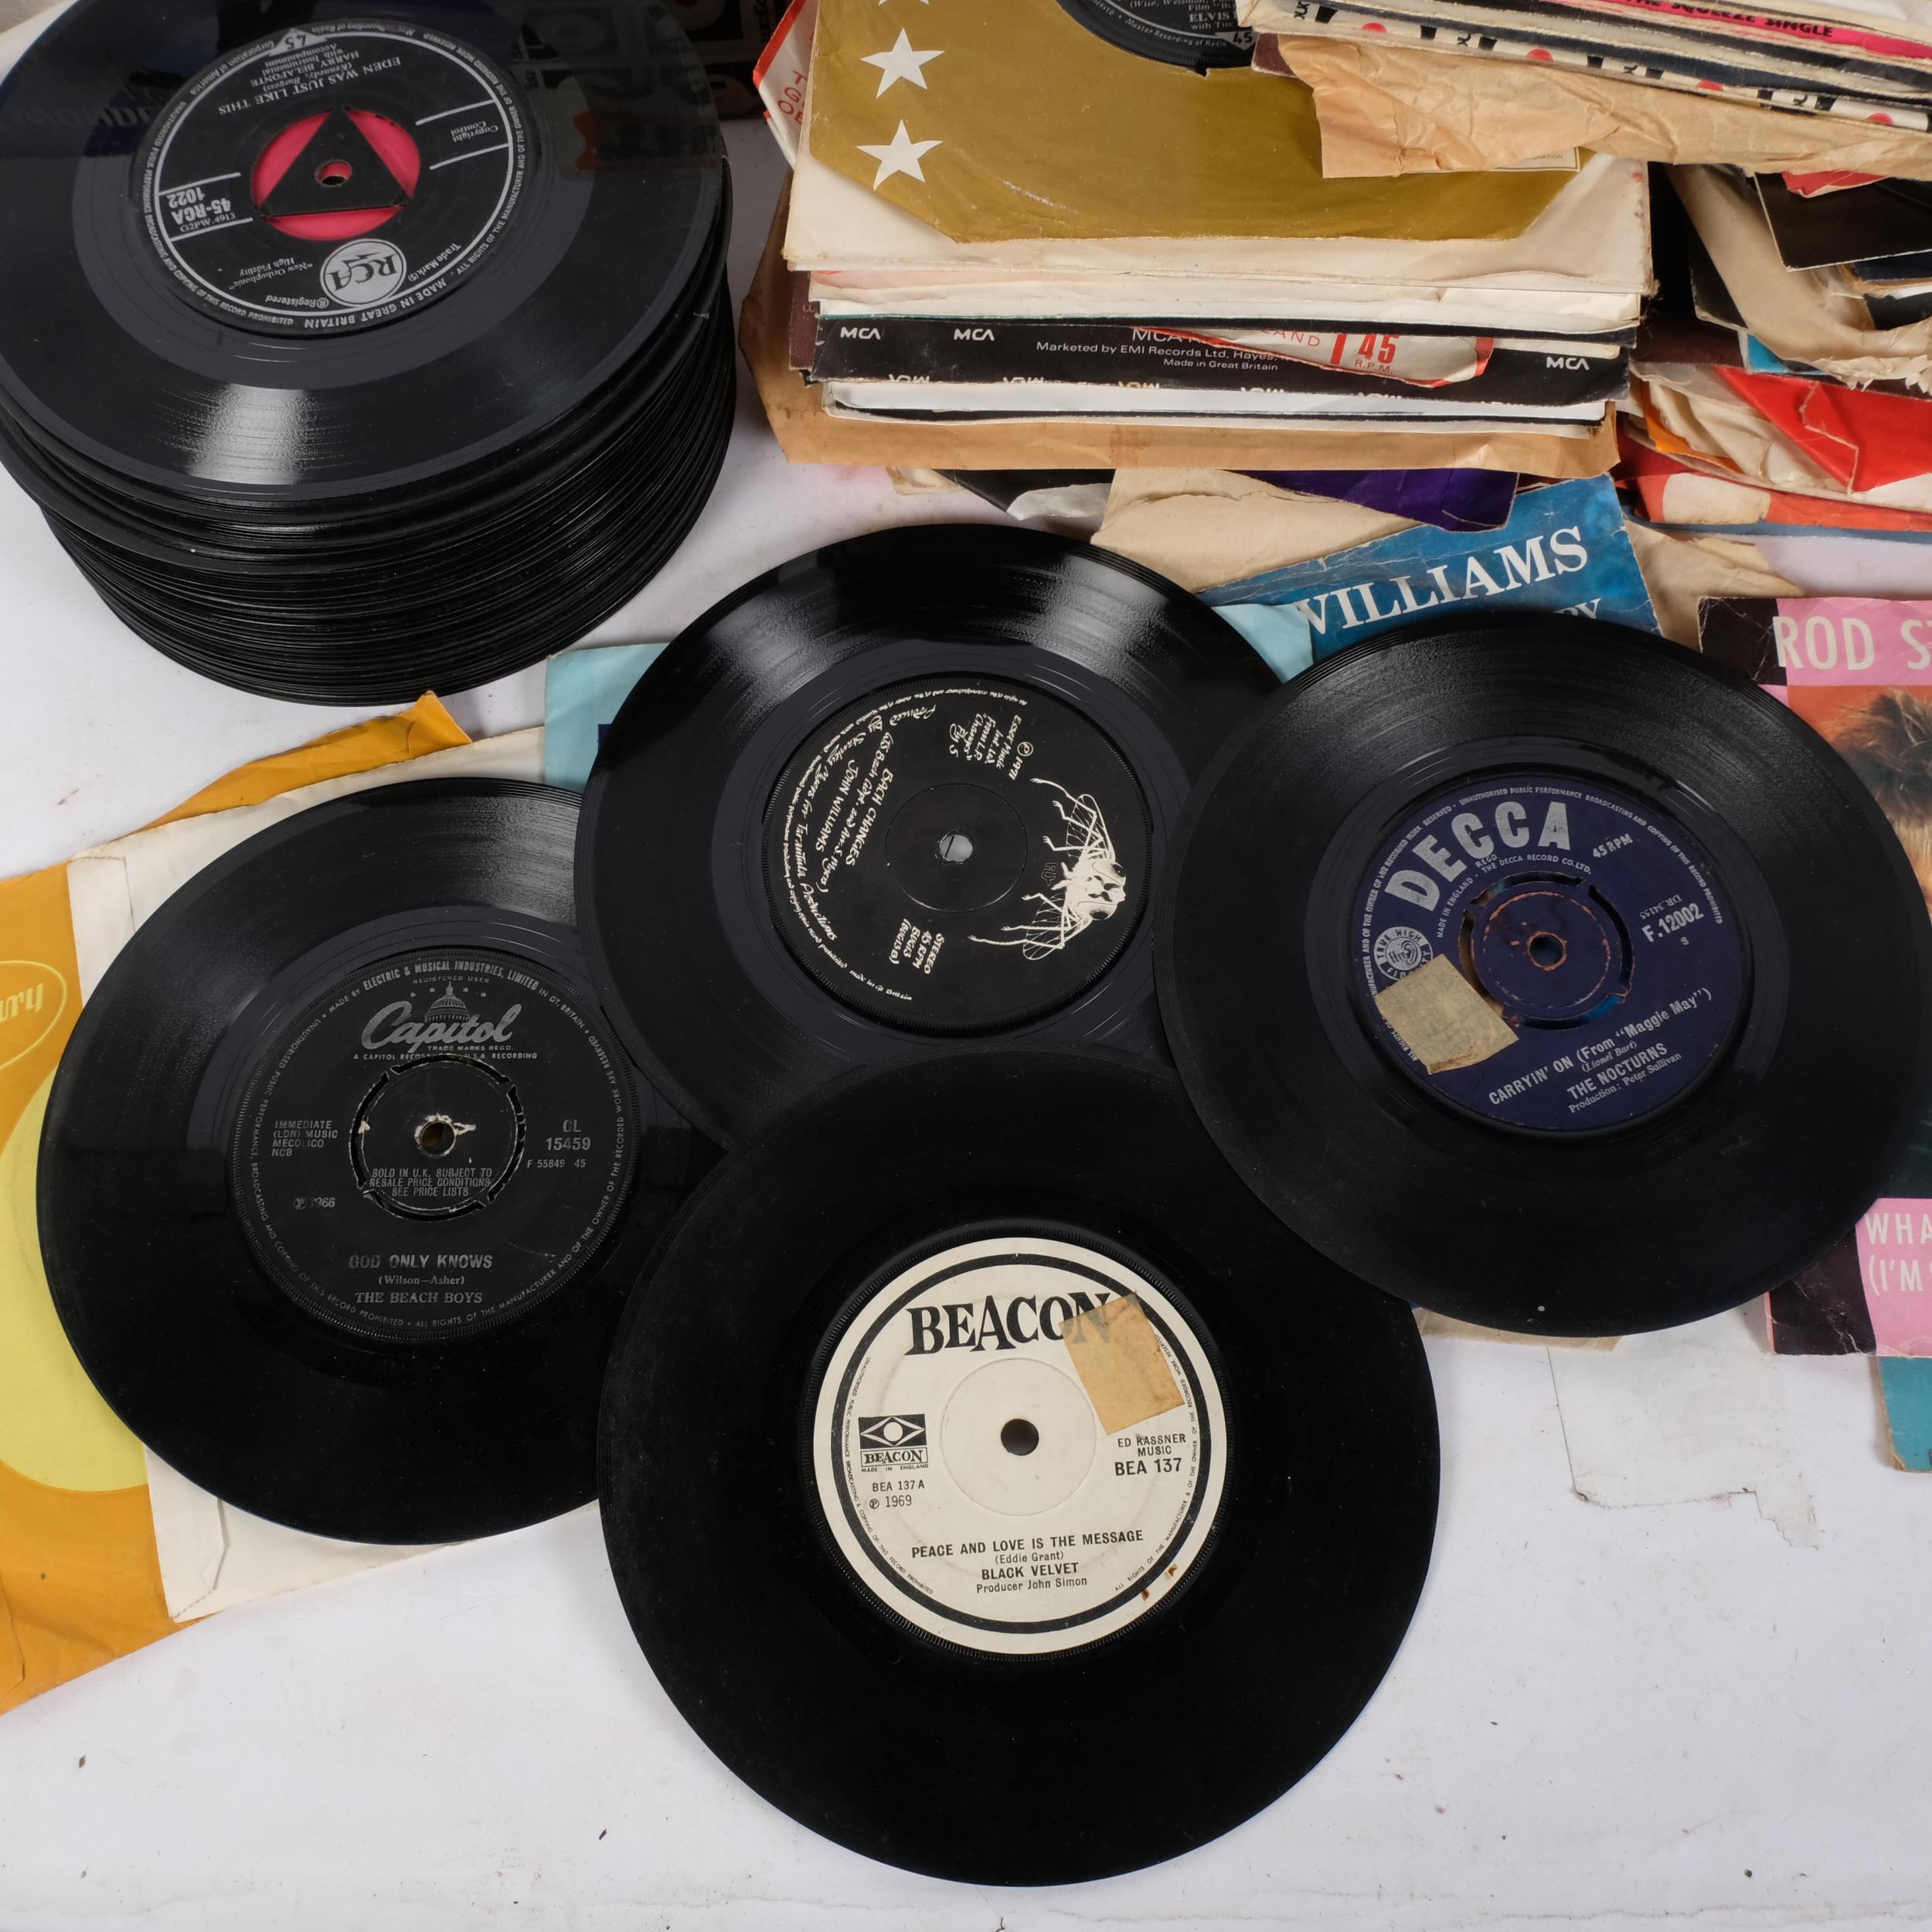 A quantity of vinyl 7" records, various artists and genres, including Paul McCartney, Elvis Presley, - Image 2 of 2